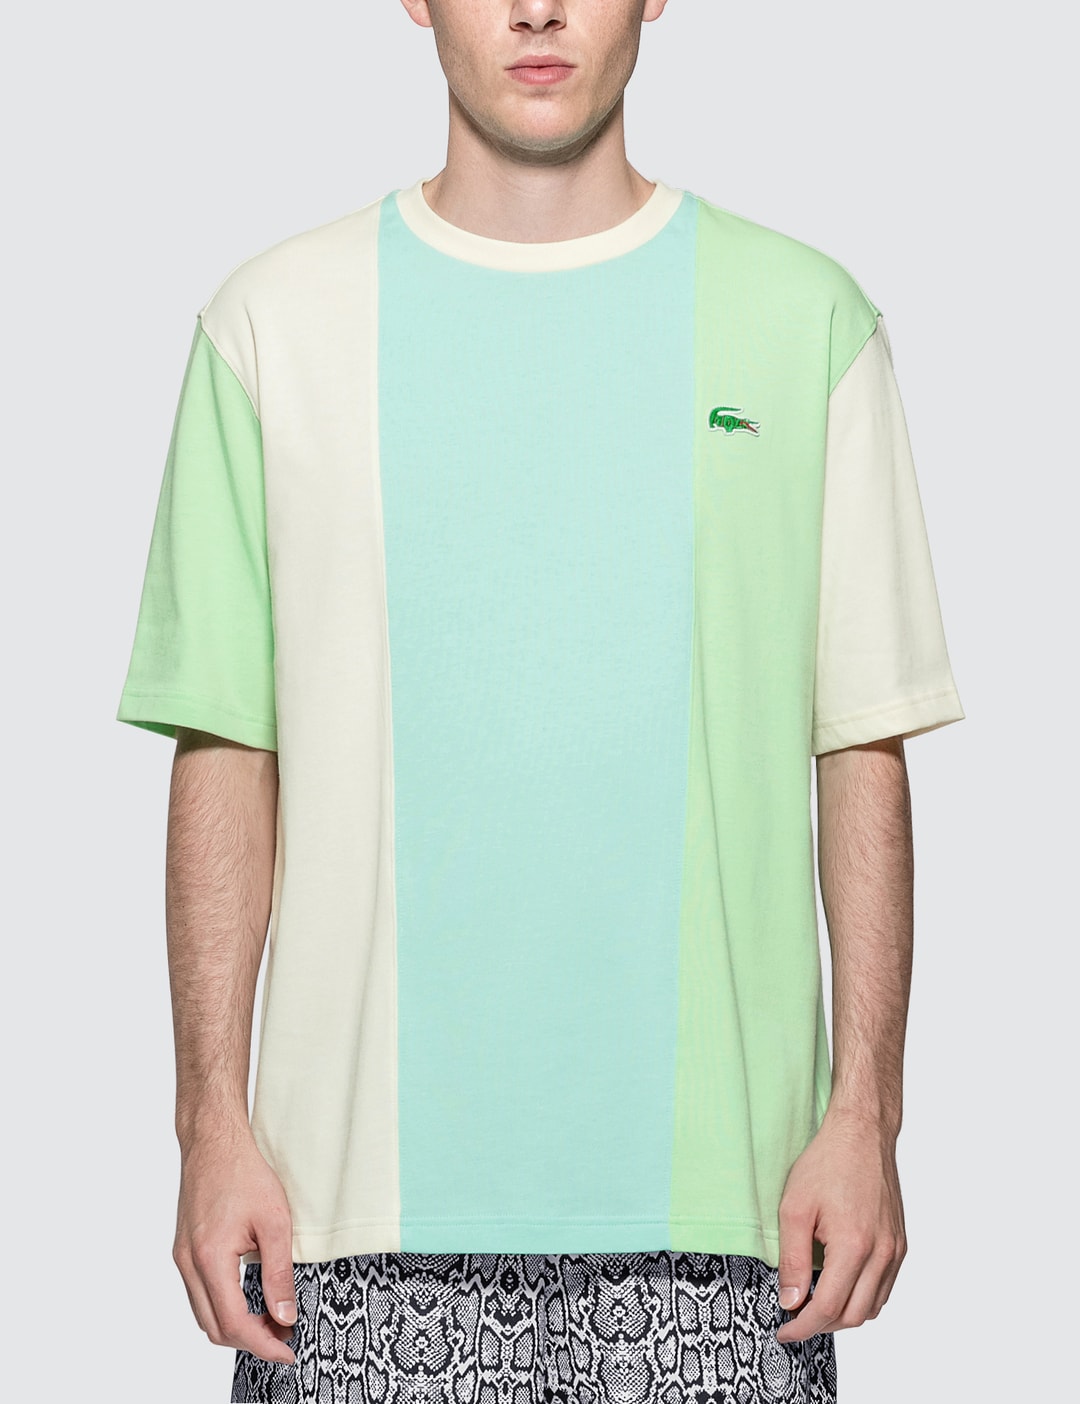 rustfri Retouch Overbevisende Lacoste - GOLF le FLEUR* x Lacoste Cut & Sewn Stripe T-shirt | HBX -  Globally Curated Fashion and Lifestyle by Hypebeast